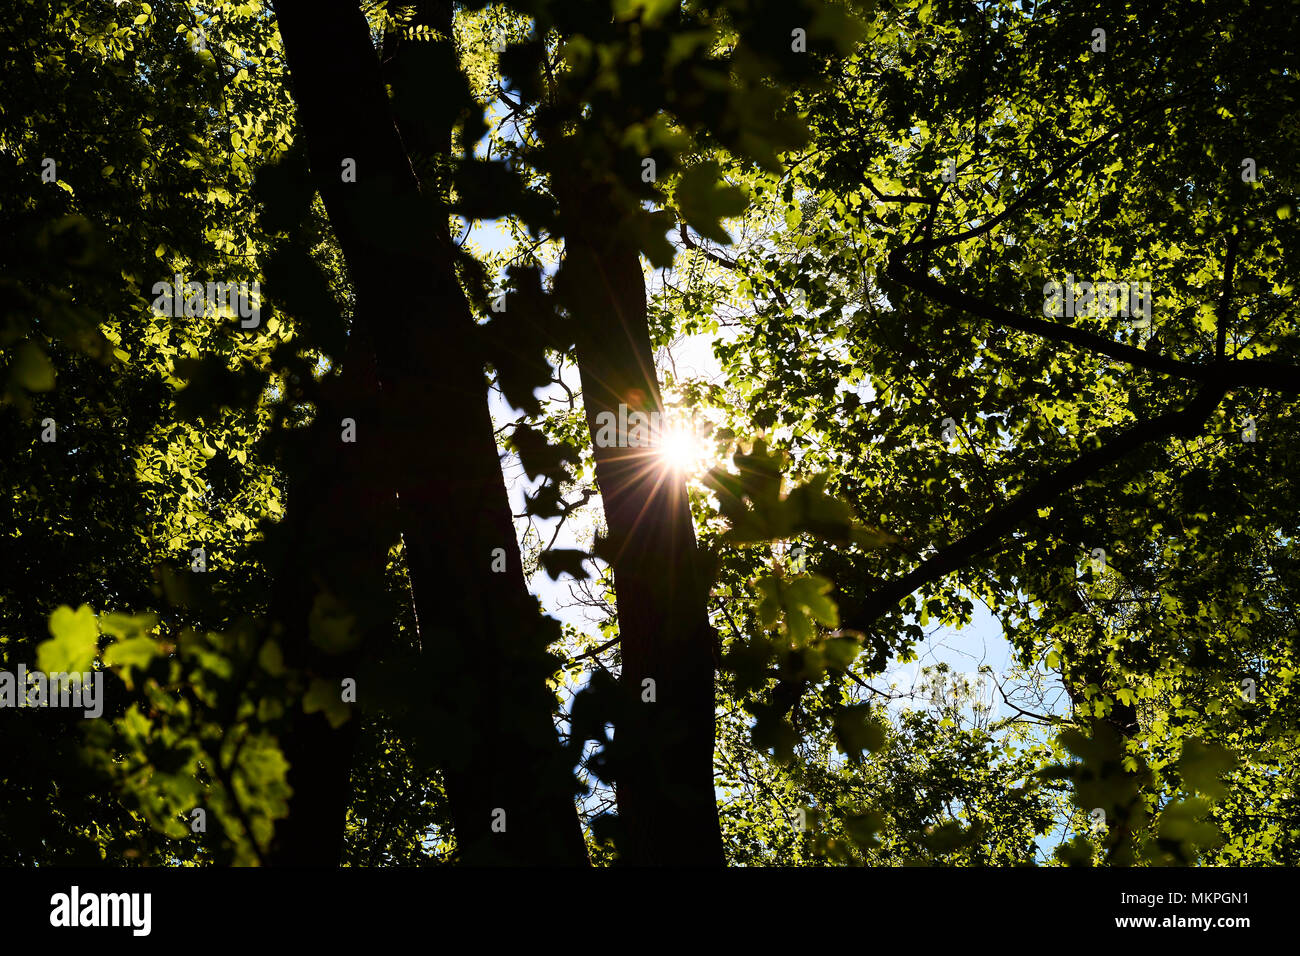 Treetop with leaves and sun shining through the branches, on a bright spring or summer day Stock Photo